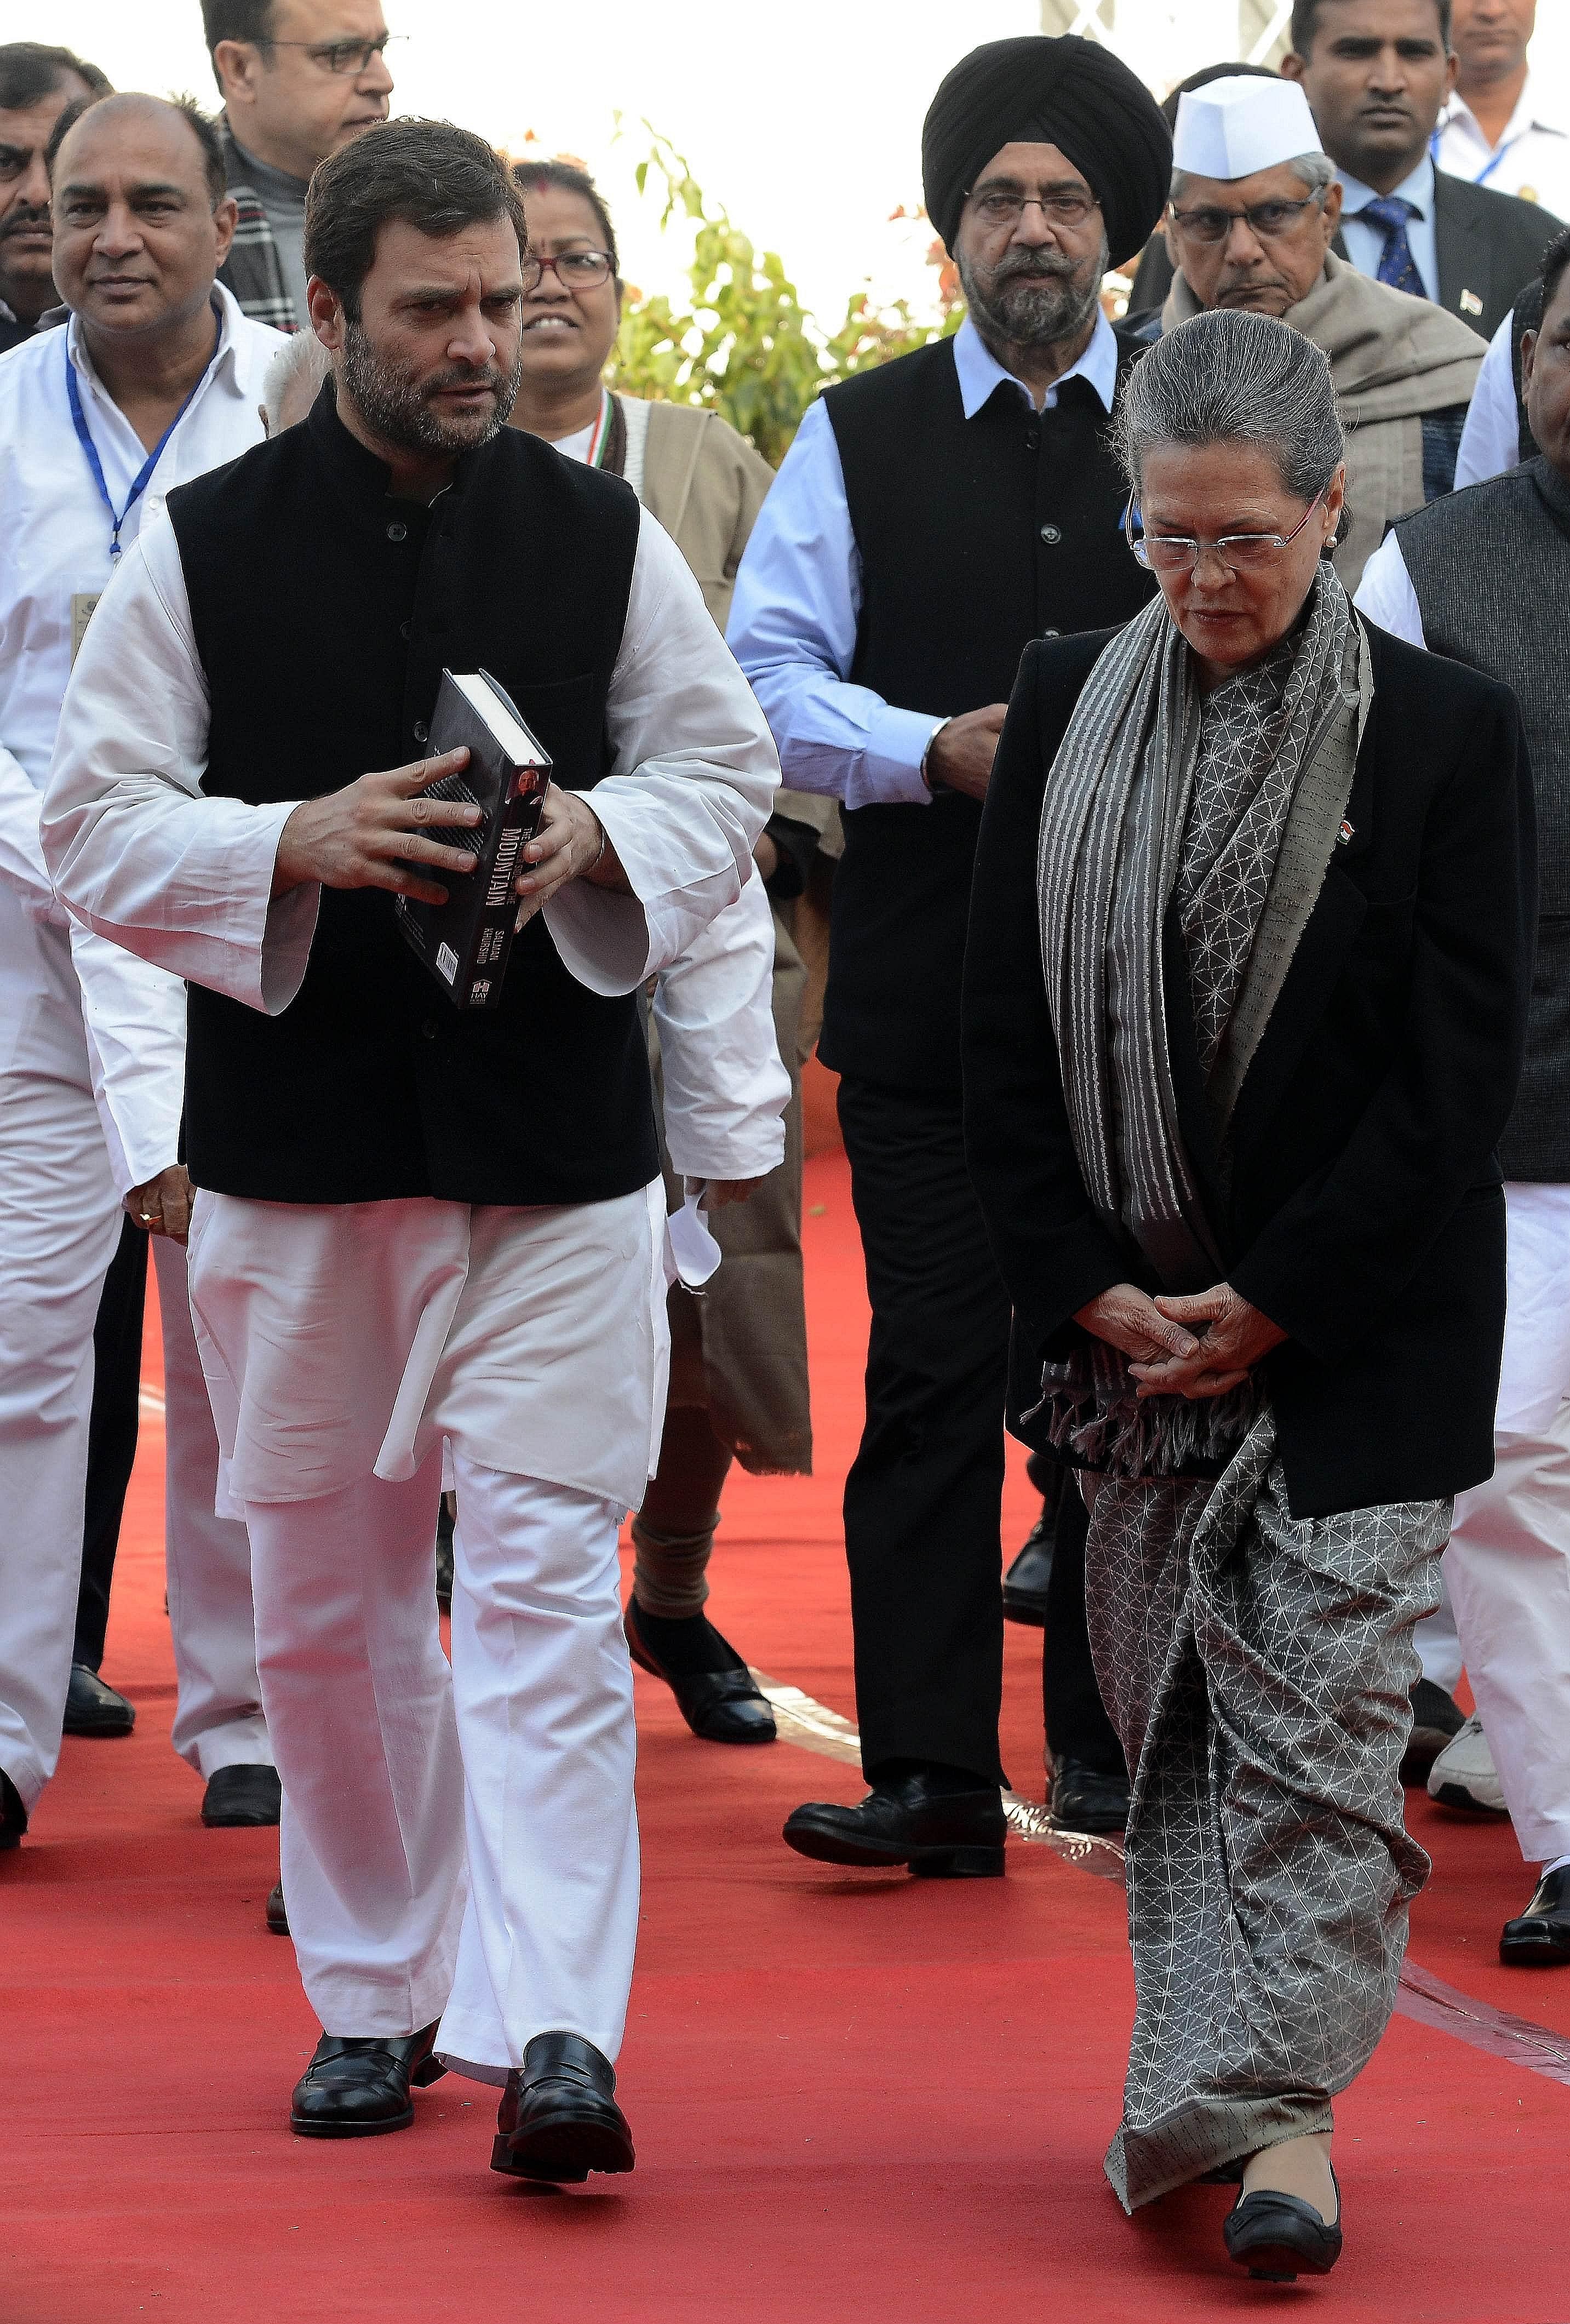 In a sign of what could be a blow to the dynastic system in India, Sonia Gandhi (left), president of the Congress party, and her son Rahul (far left), the party's vice-president, were forced to appear in court on corruption charges last month.